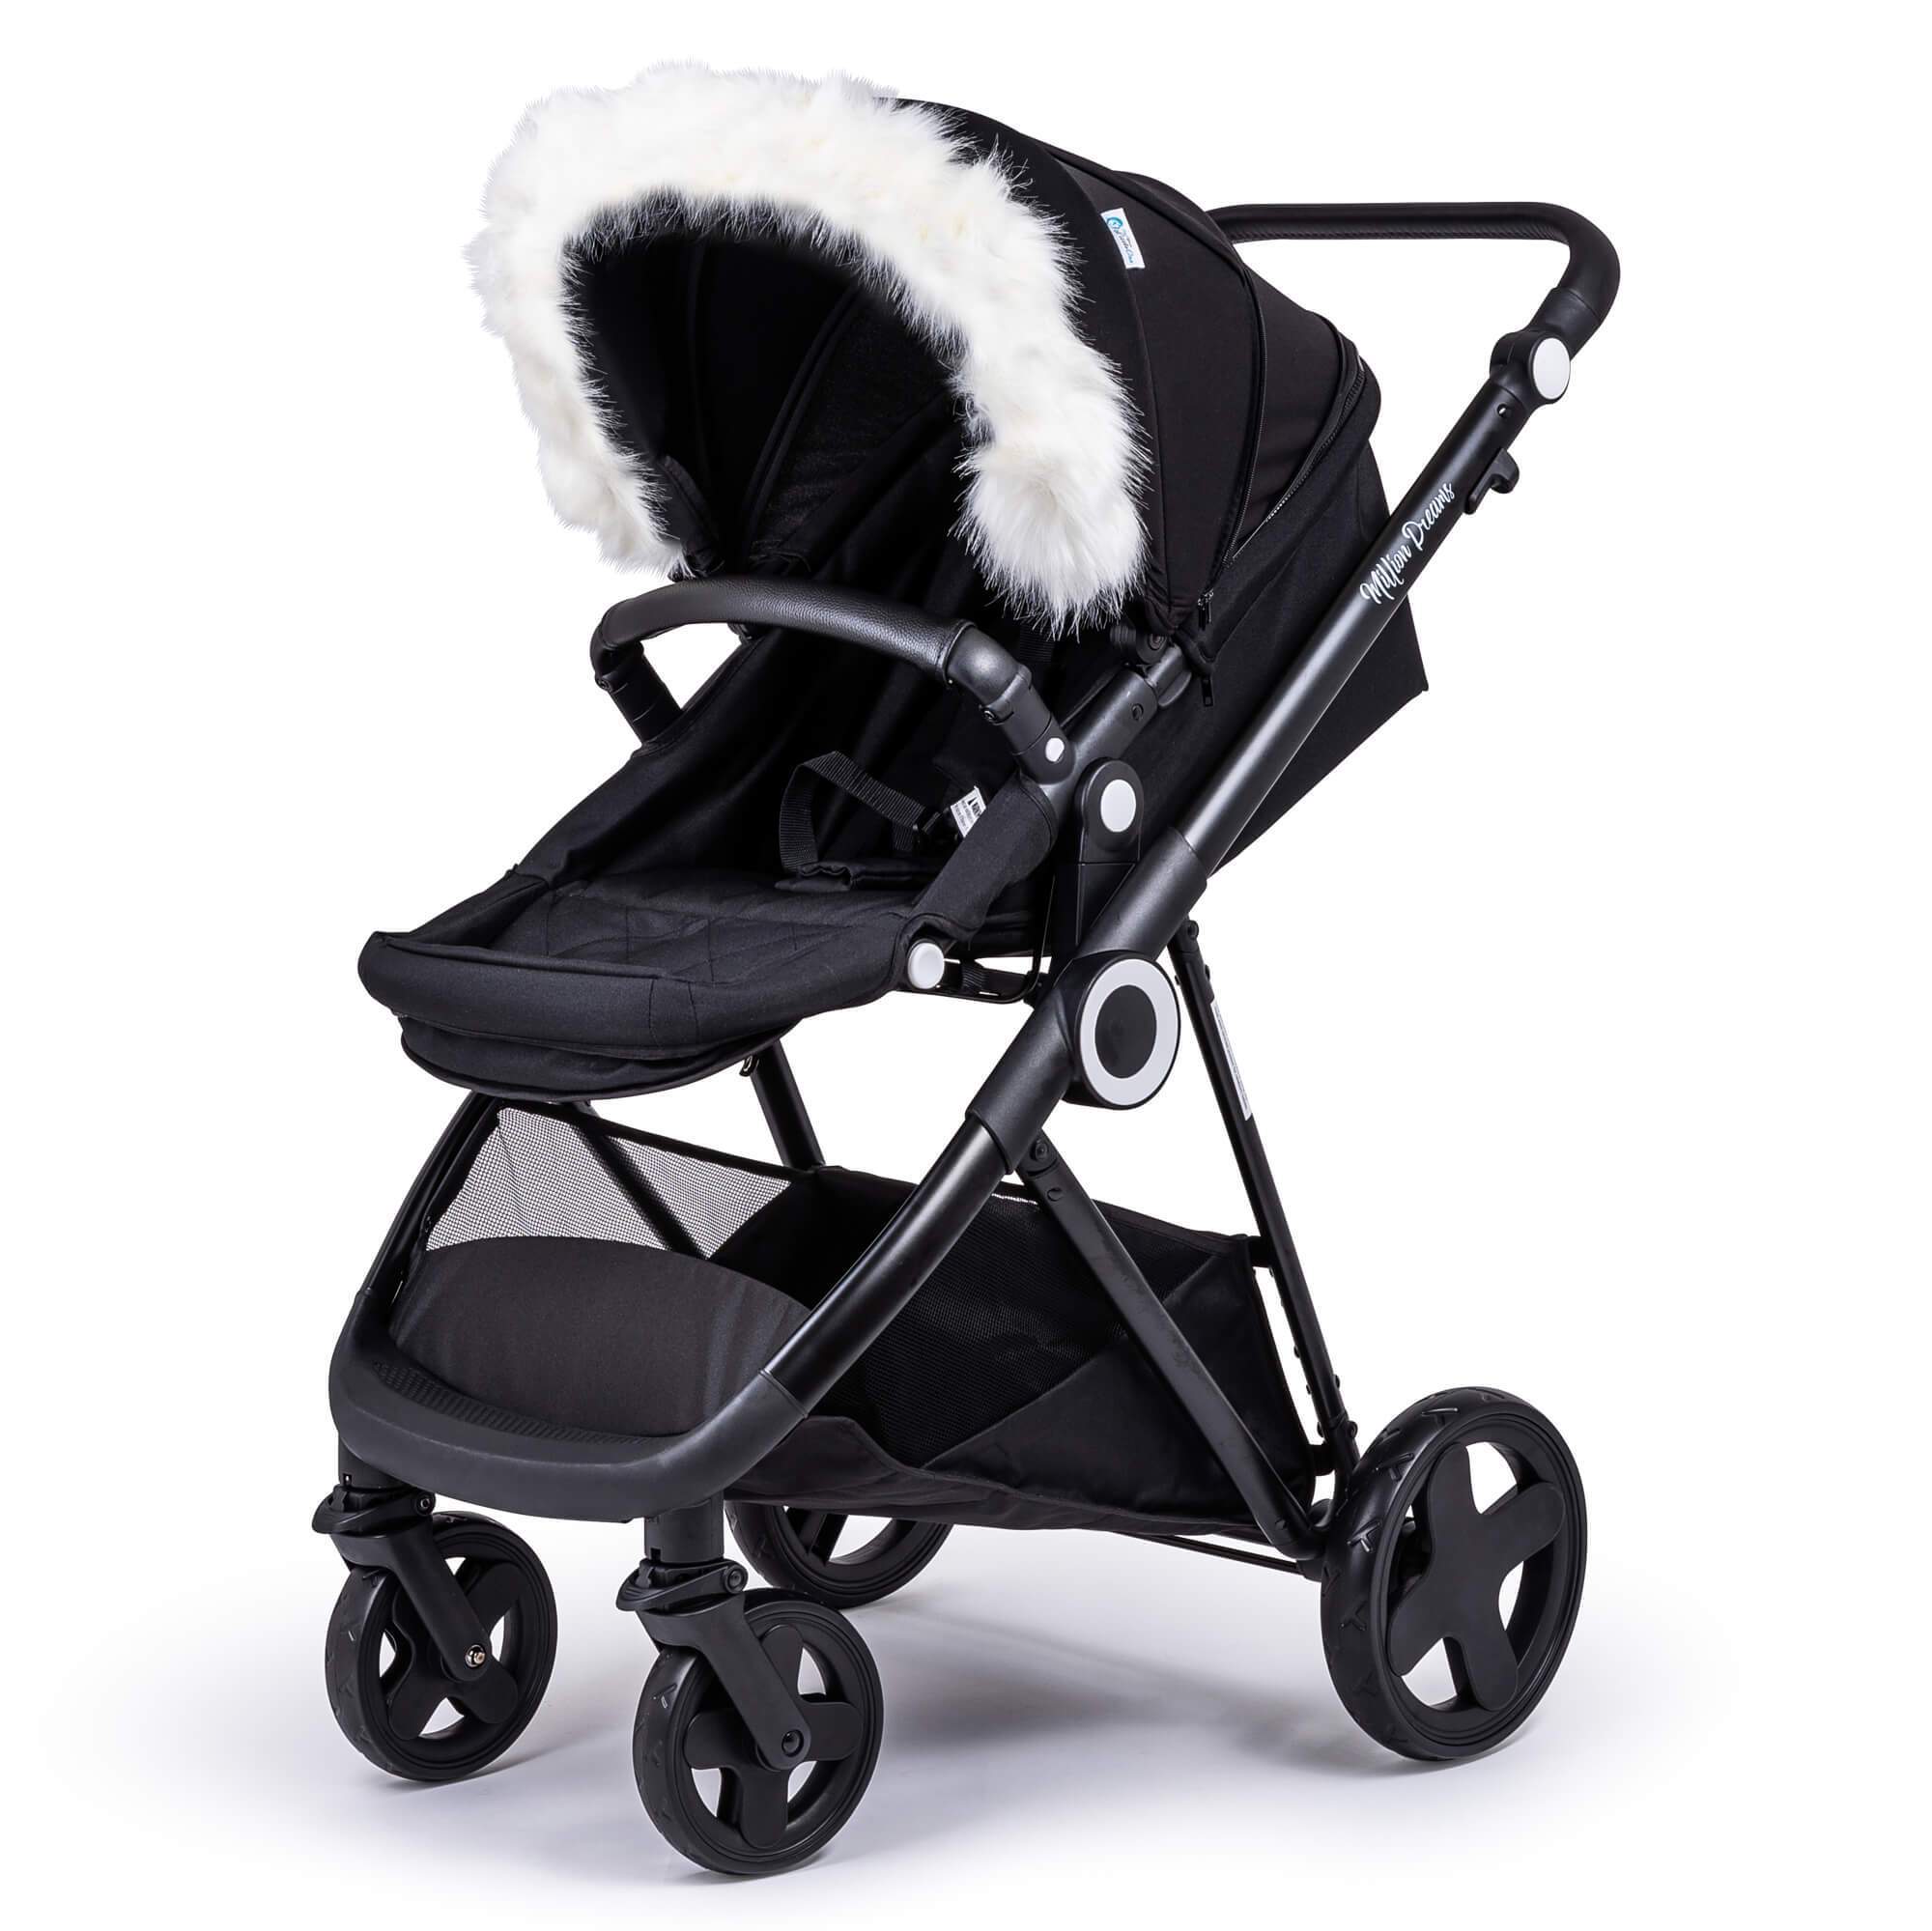 Pram Fur Hood Trim Attachment for Pushchair Compatible with Brevi - White / Fits All Models | For Your Little One